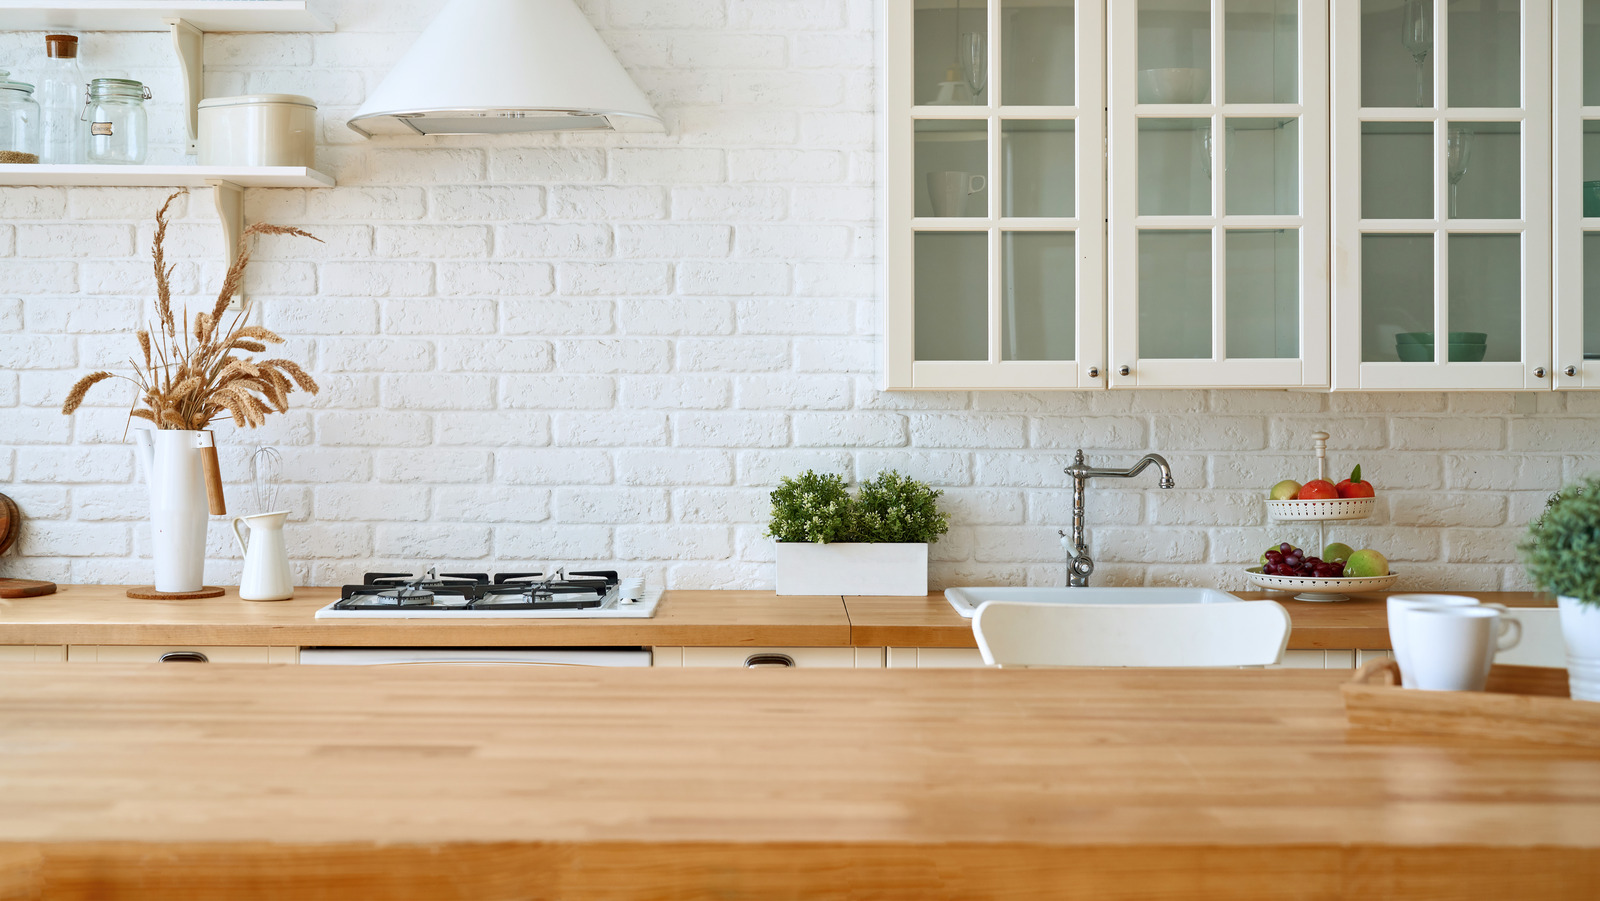 6 Things You Should Know Before Installing Butcher Block Countertops